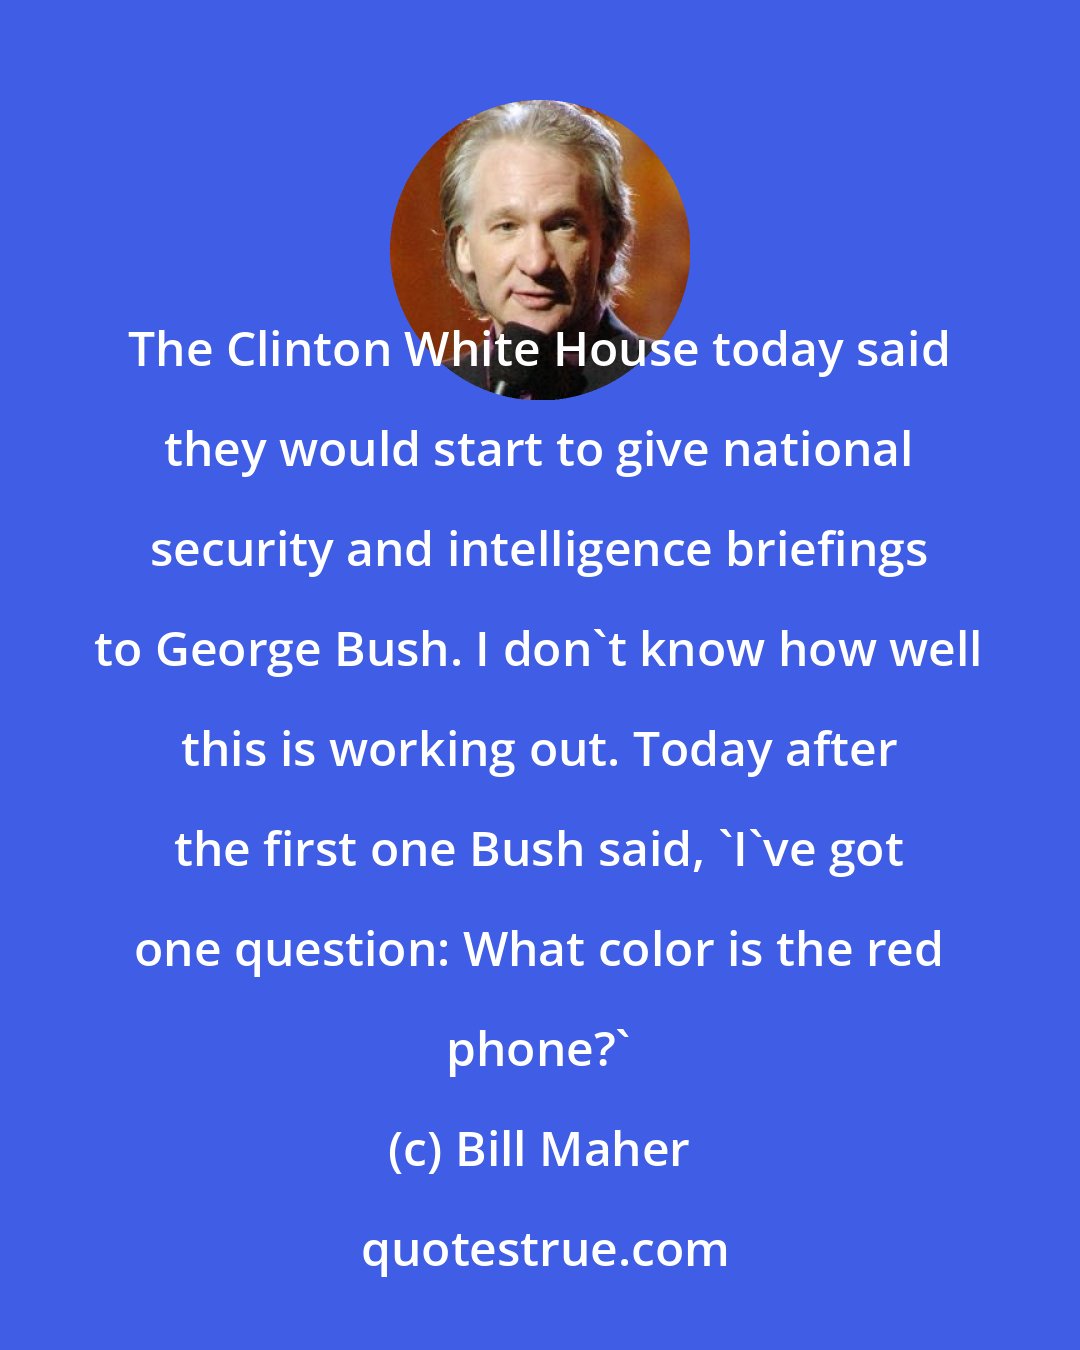 Bill Maher: The Clinton White House today said they would start to give national security and intelligence briefings to George Bush. I don't know how well this is working out. Today after the first one Bush said, 'I've got one question: What color is the red phone?'